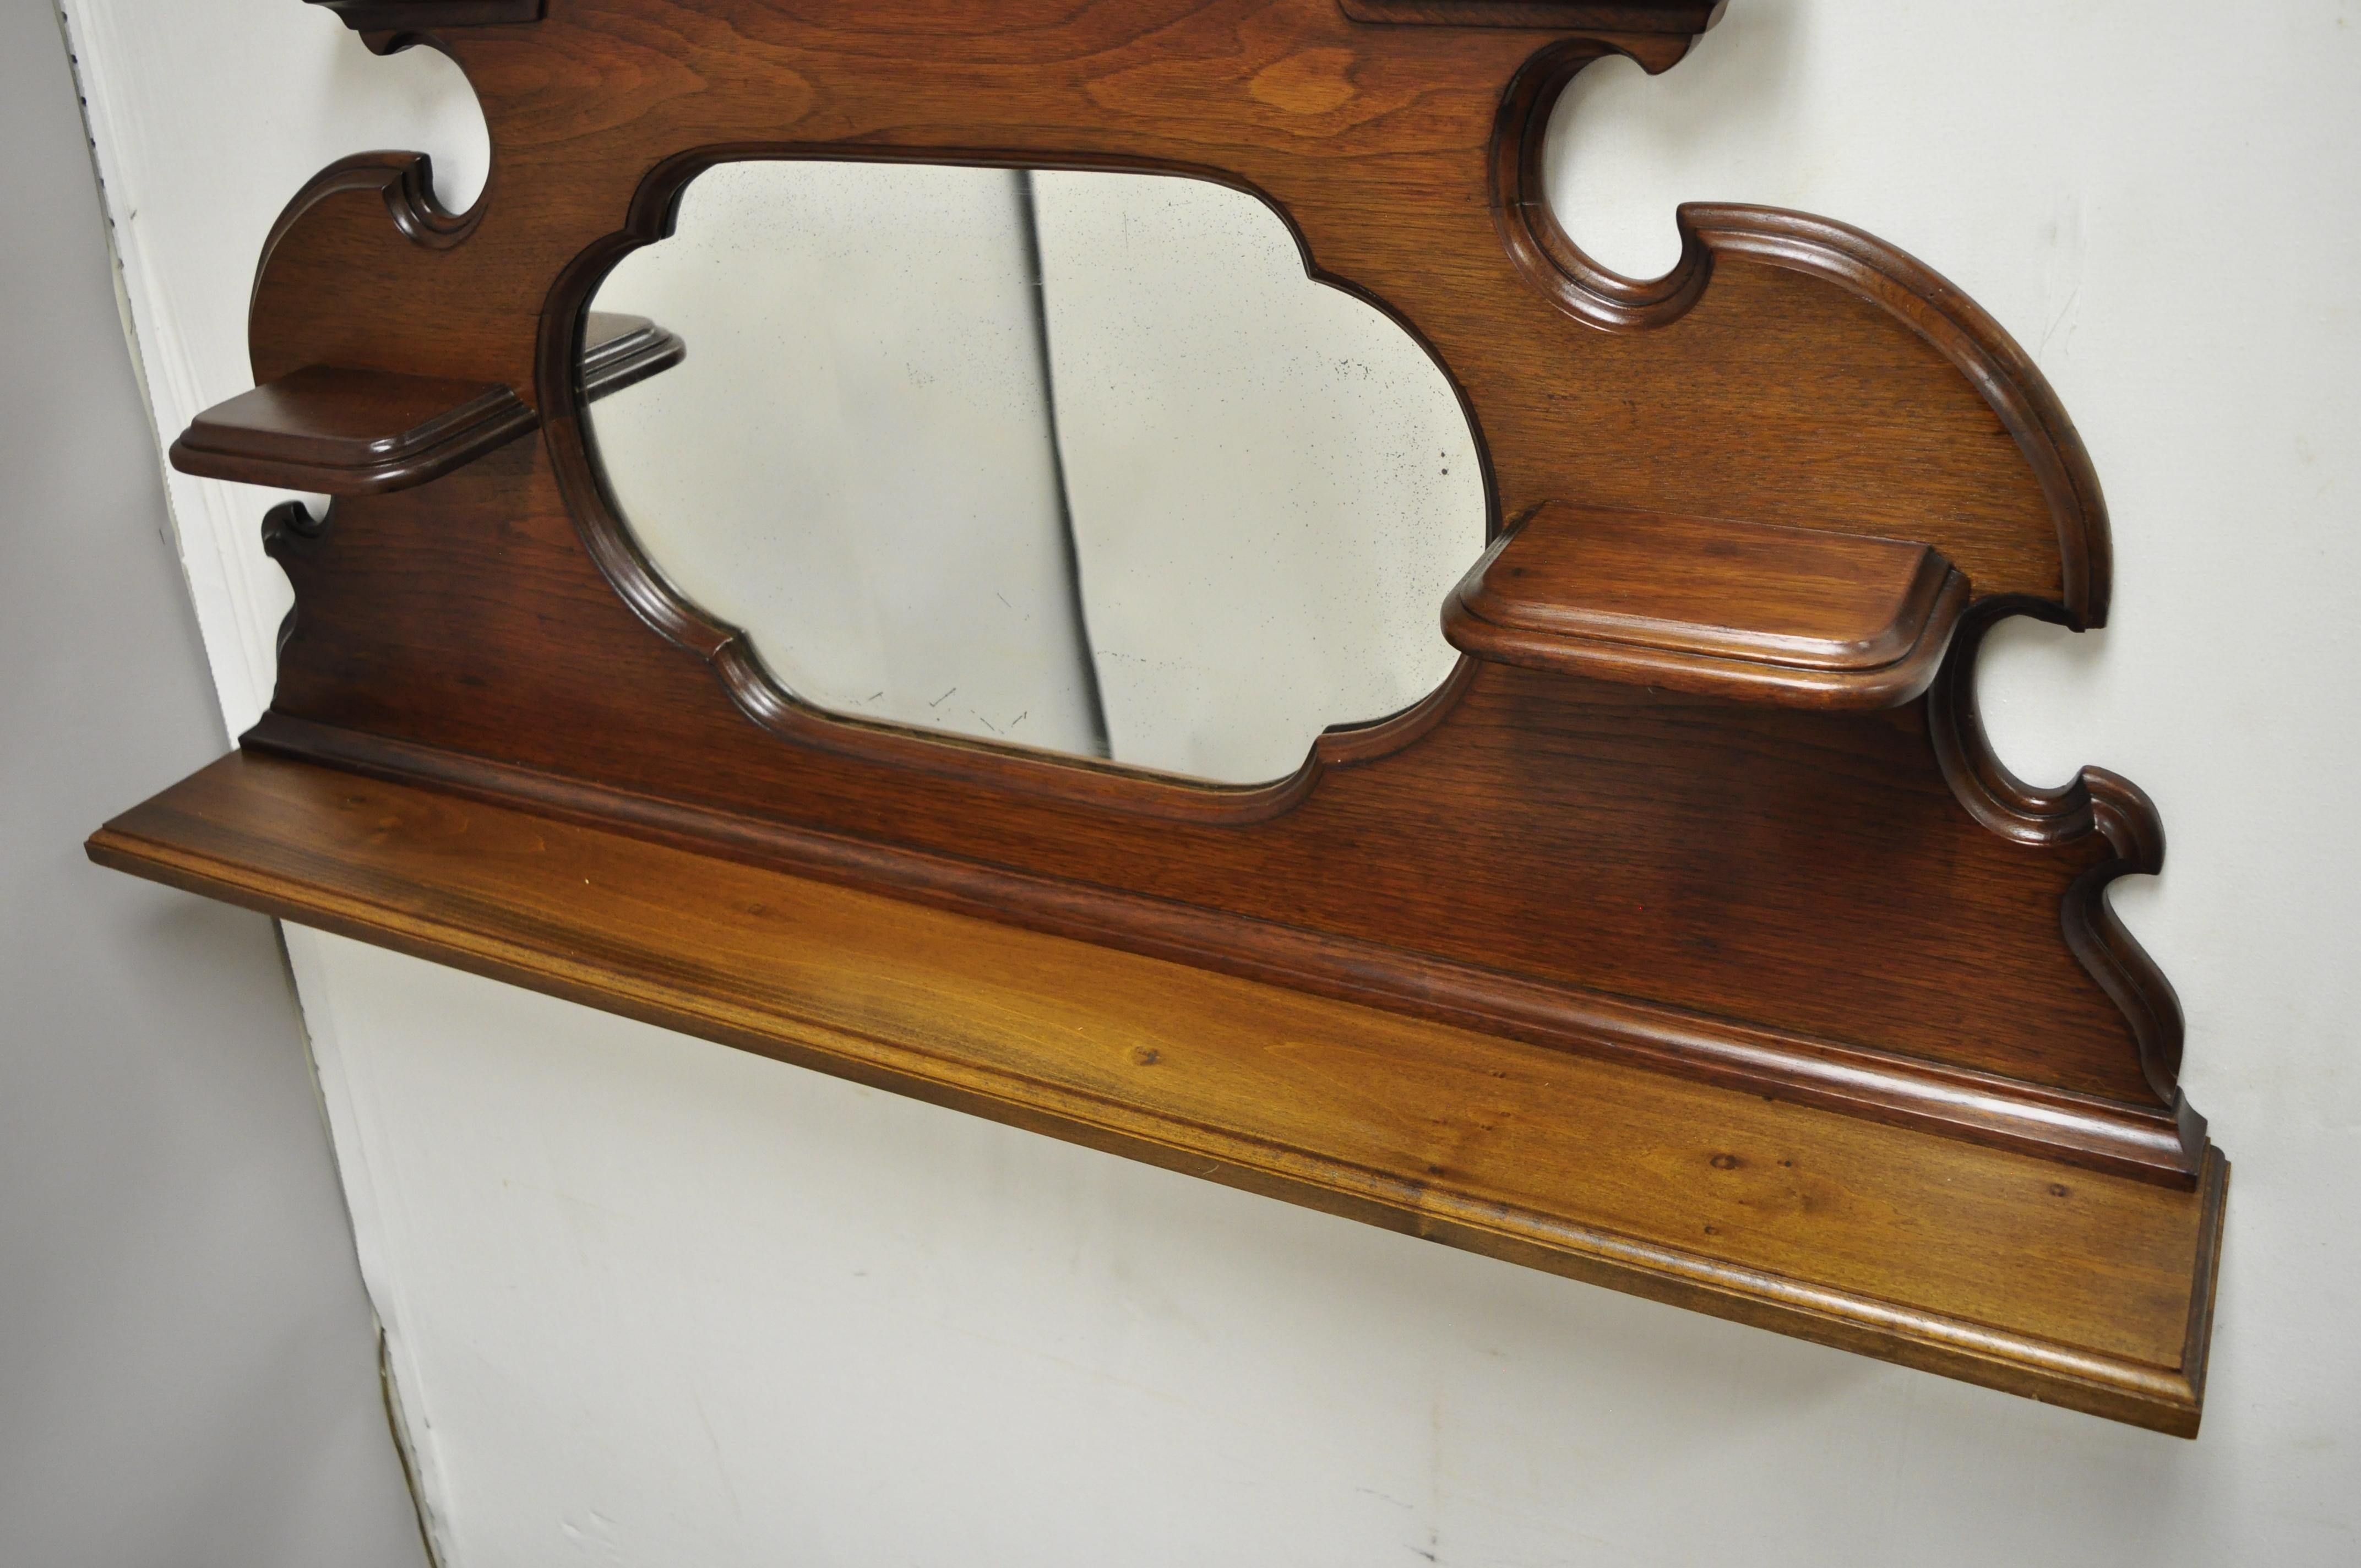 North American Antique Eastlake Victorian Carved Walnut Wall Hanging Mirror Wall Shelf Display